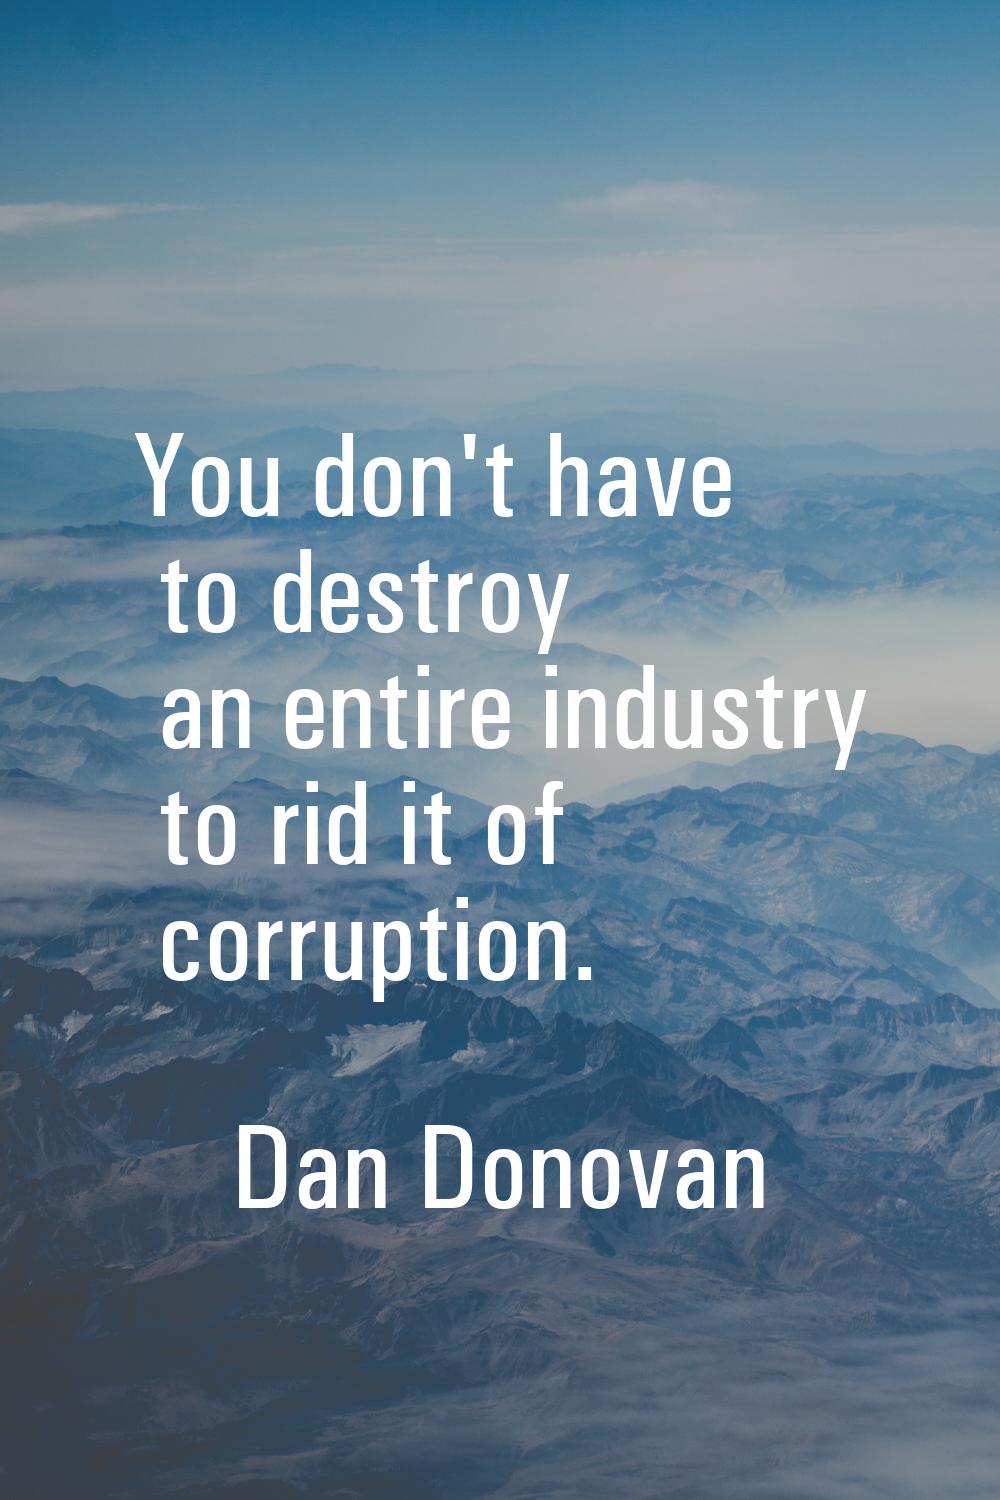 You don't have to destroy an entire industry to rid it of corruption.